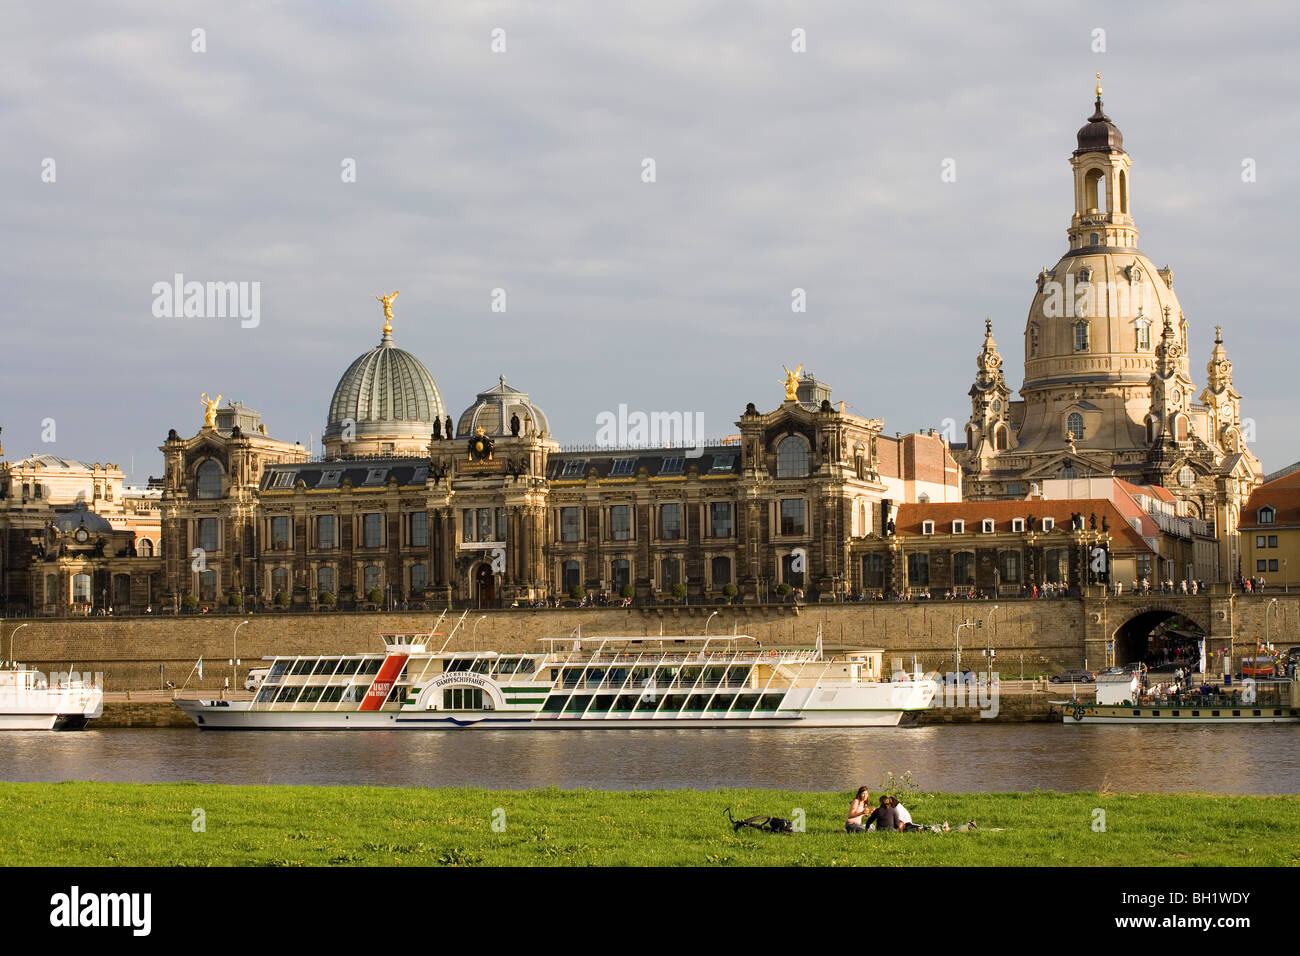 Skyline of Dresden with Bruehlsche terrace, Academy of Fine Arts and Frauenkirche, Church of Our Lady, over the Elbe River, Dres Stock Photo